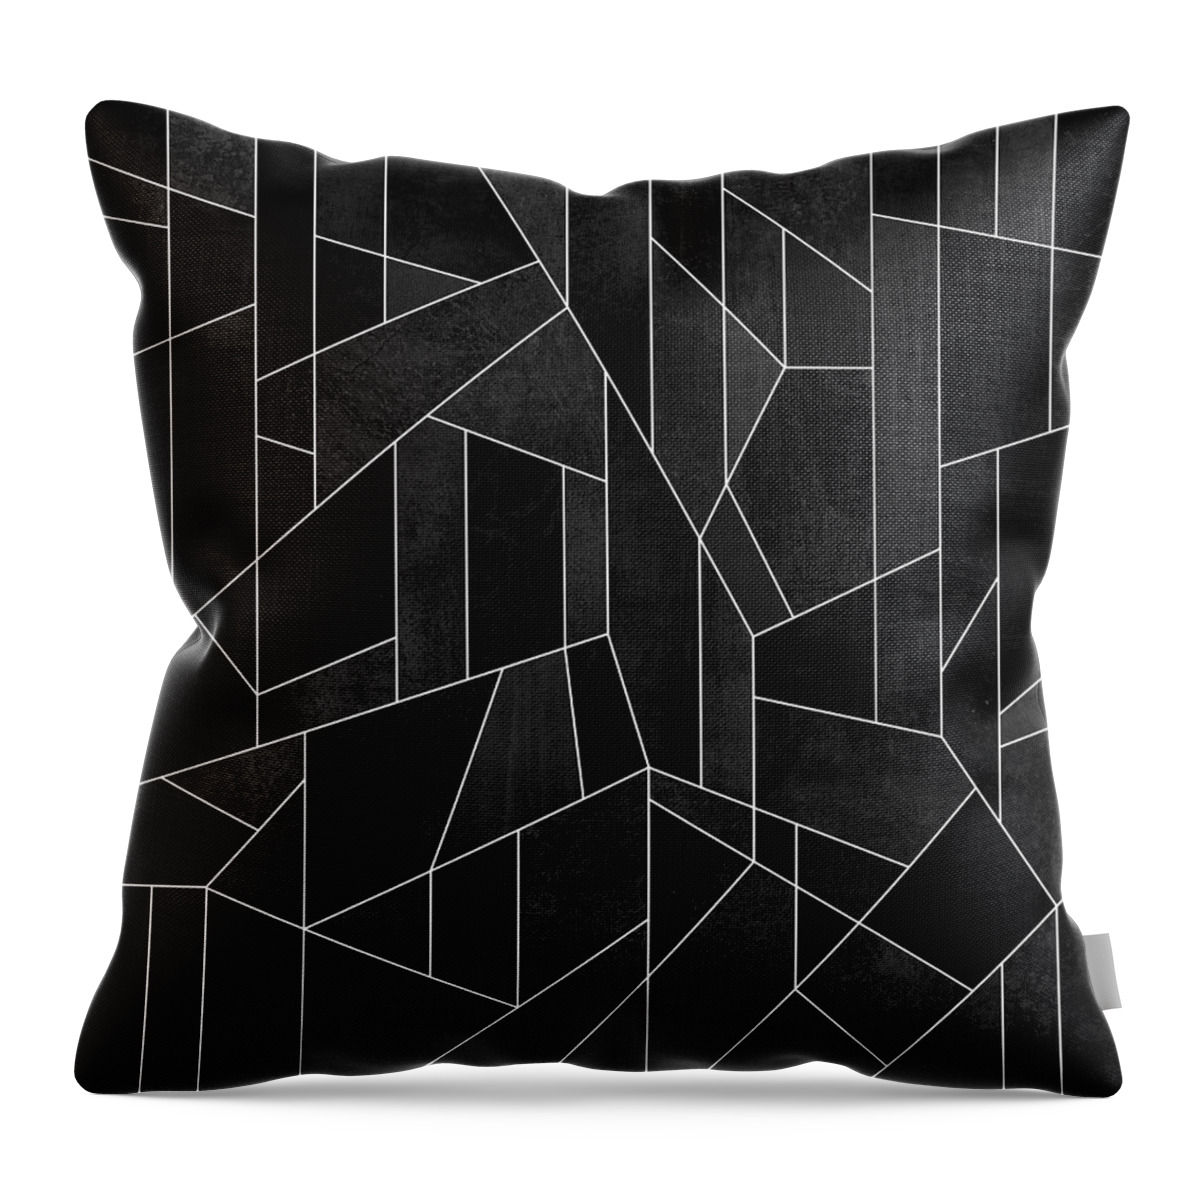 Graphic Throw Pillow featuring the digital art Skyscraper 2 by Elisabeth Fredriksson